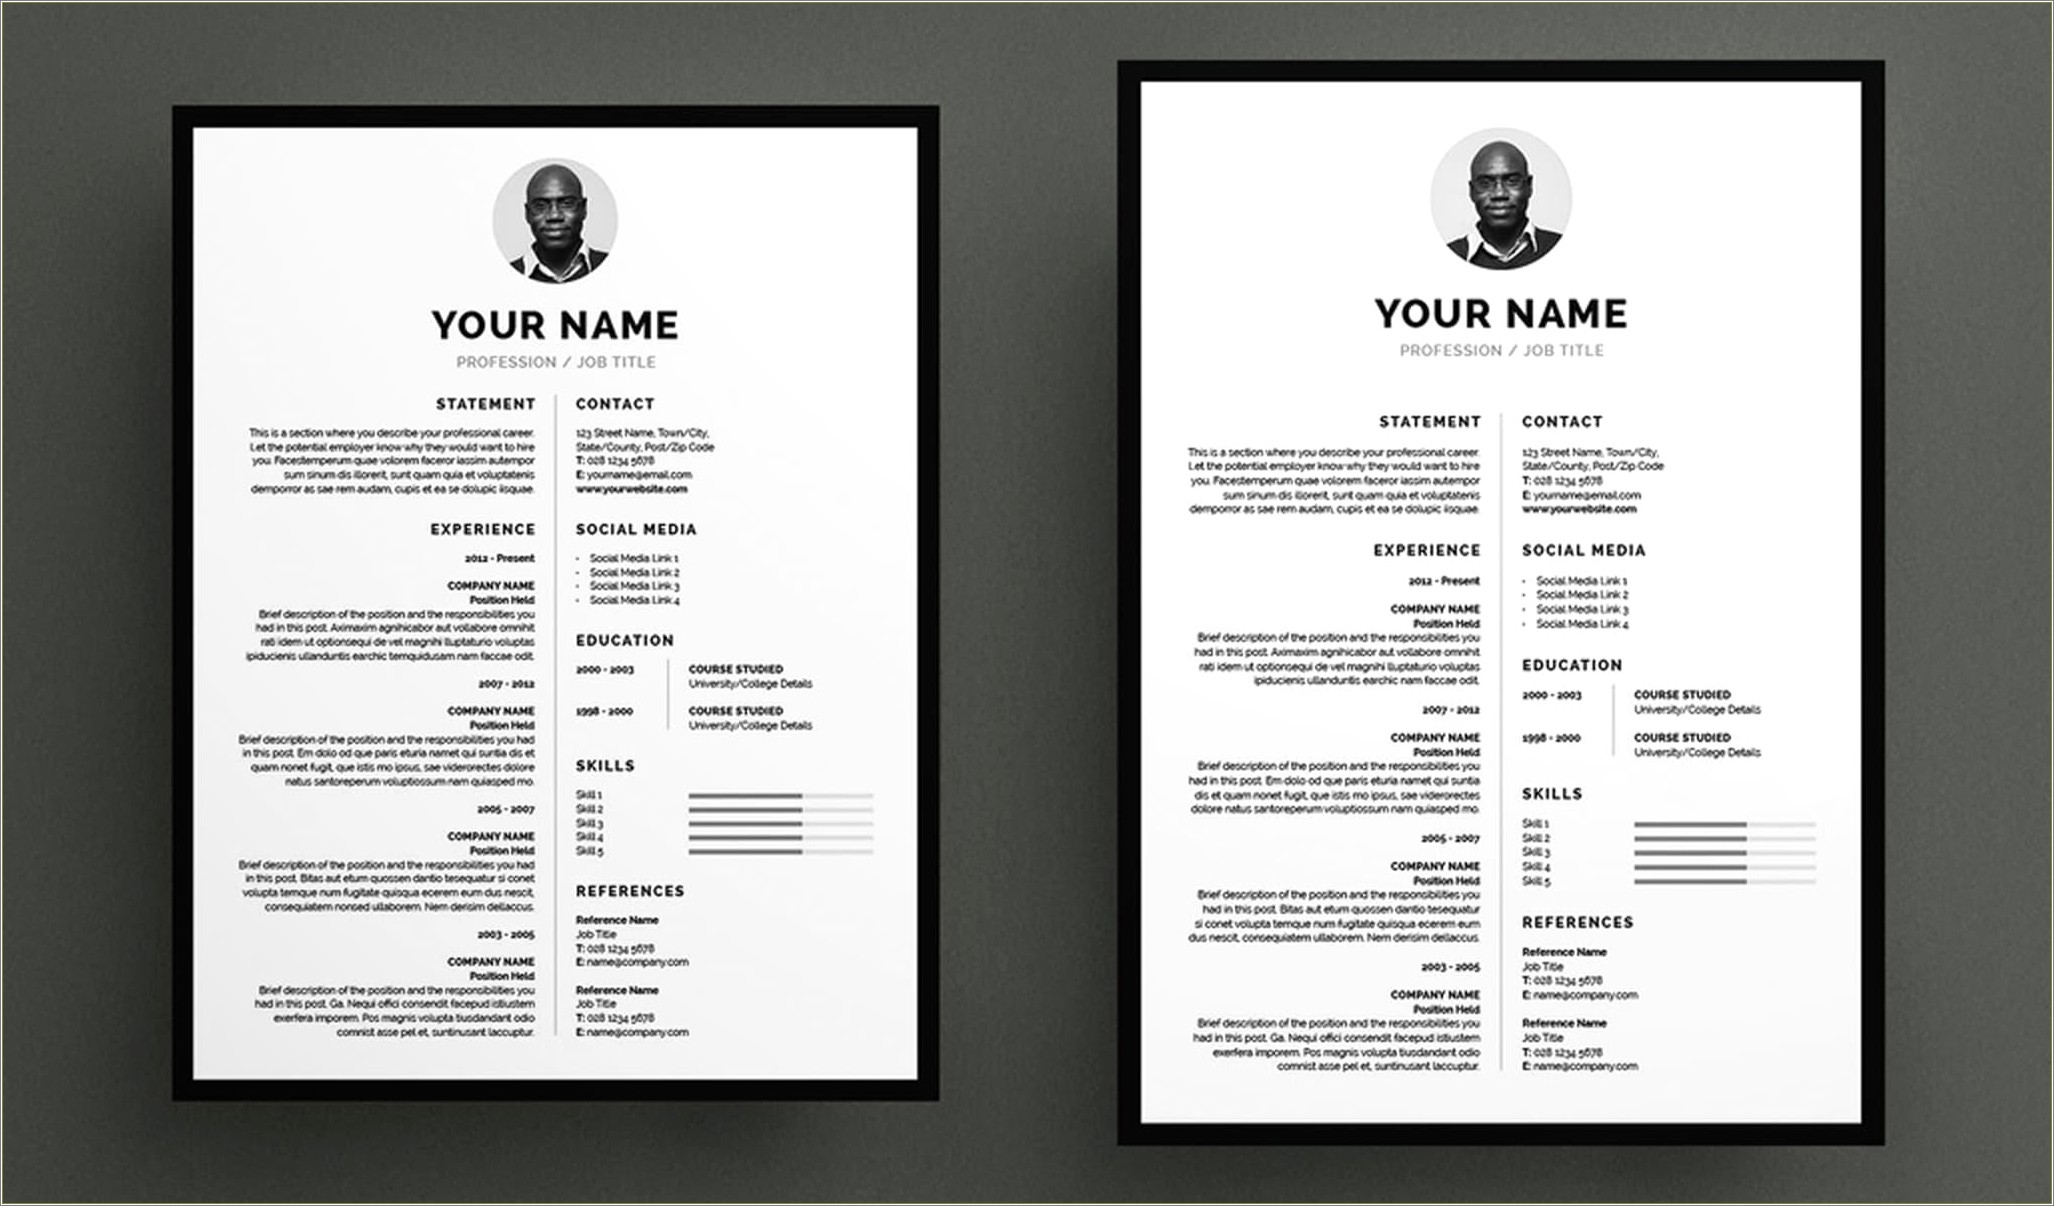 Indesign Resume And Cover Letter Template Free